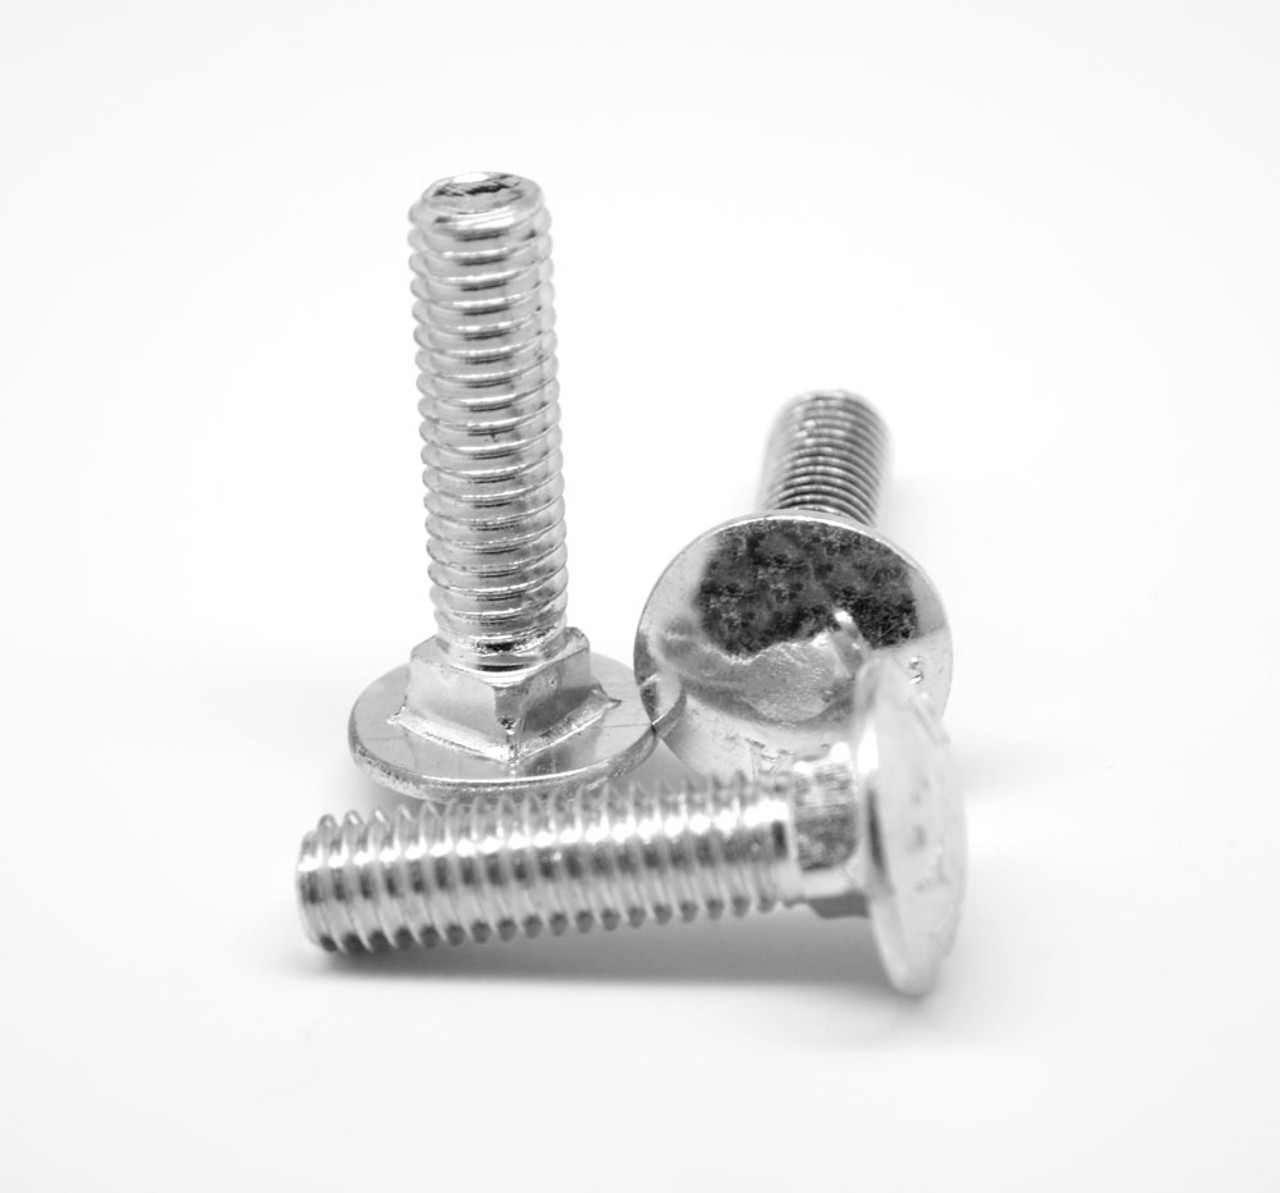 5/16"-18 x 2 1/4" (FT) Coarse Thread A307 Grade A Carriage Bolt Low Carbon Steel Zinc Plated